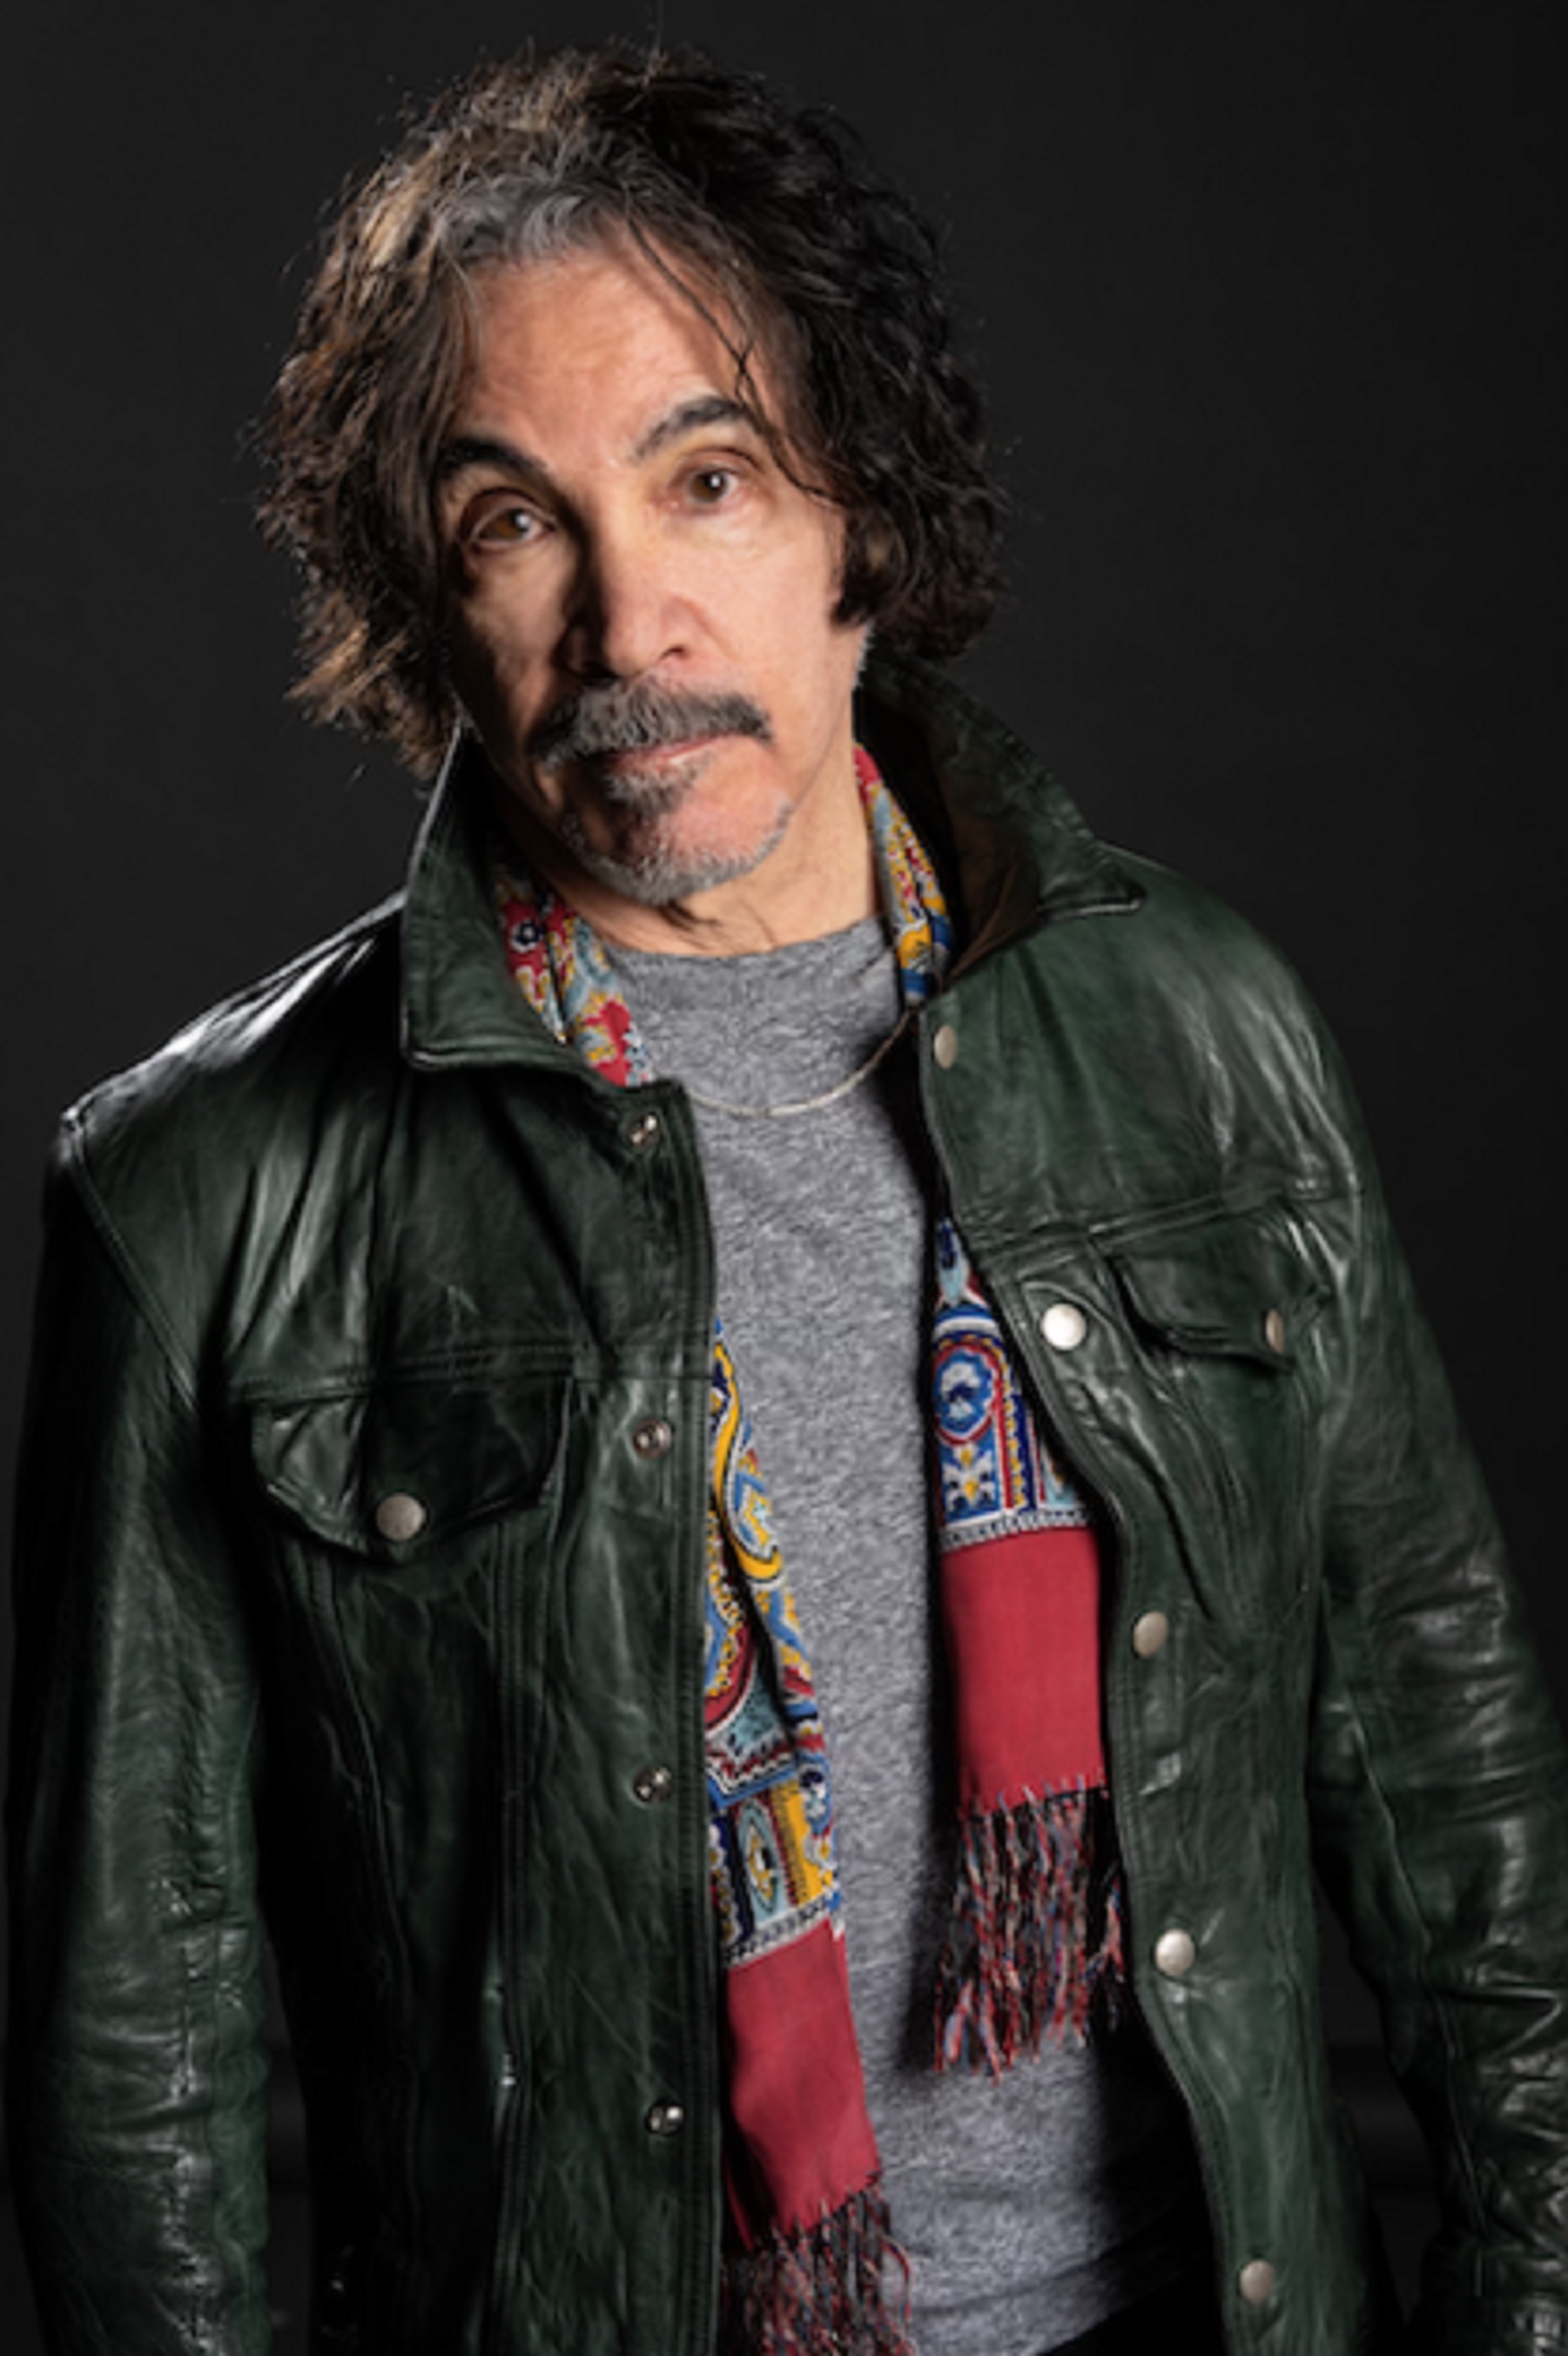 JOHN OATES Releases New Single “Too Late To Break Your Fall"